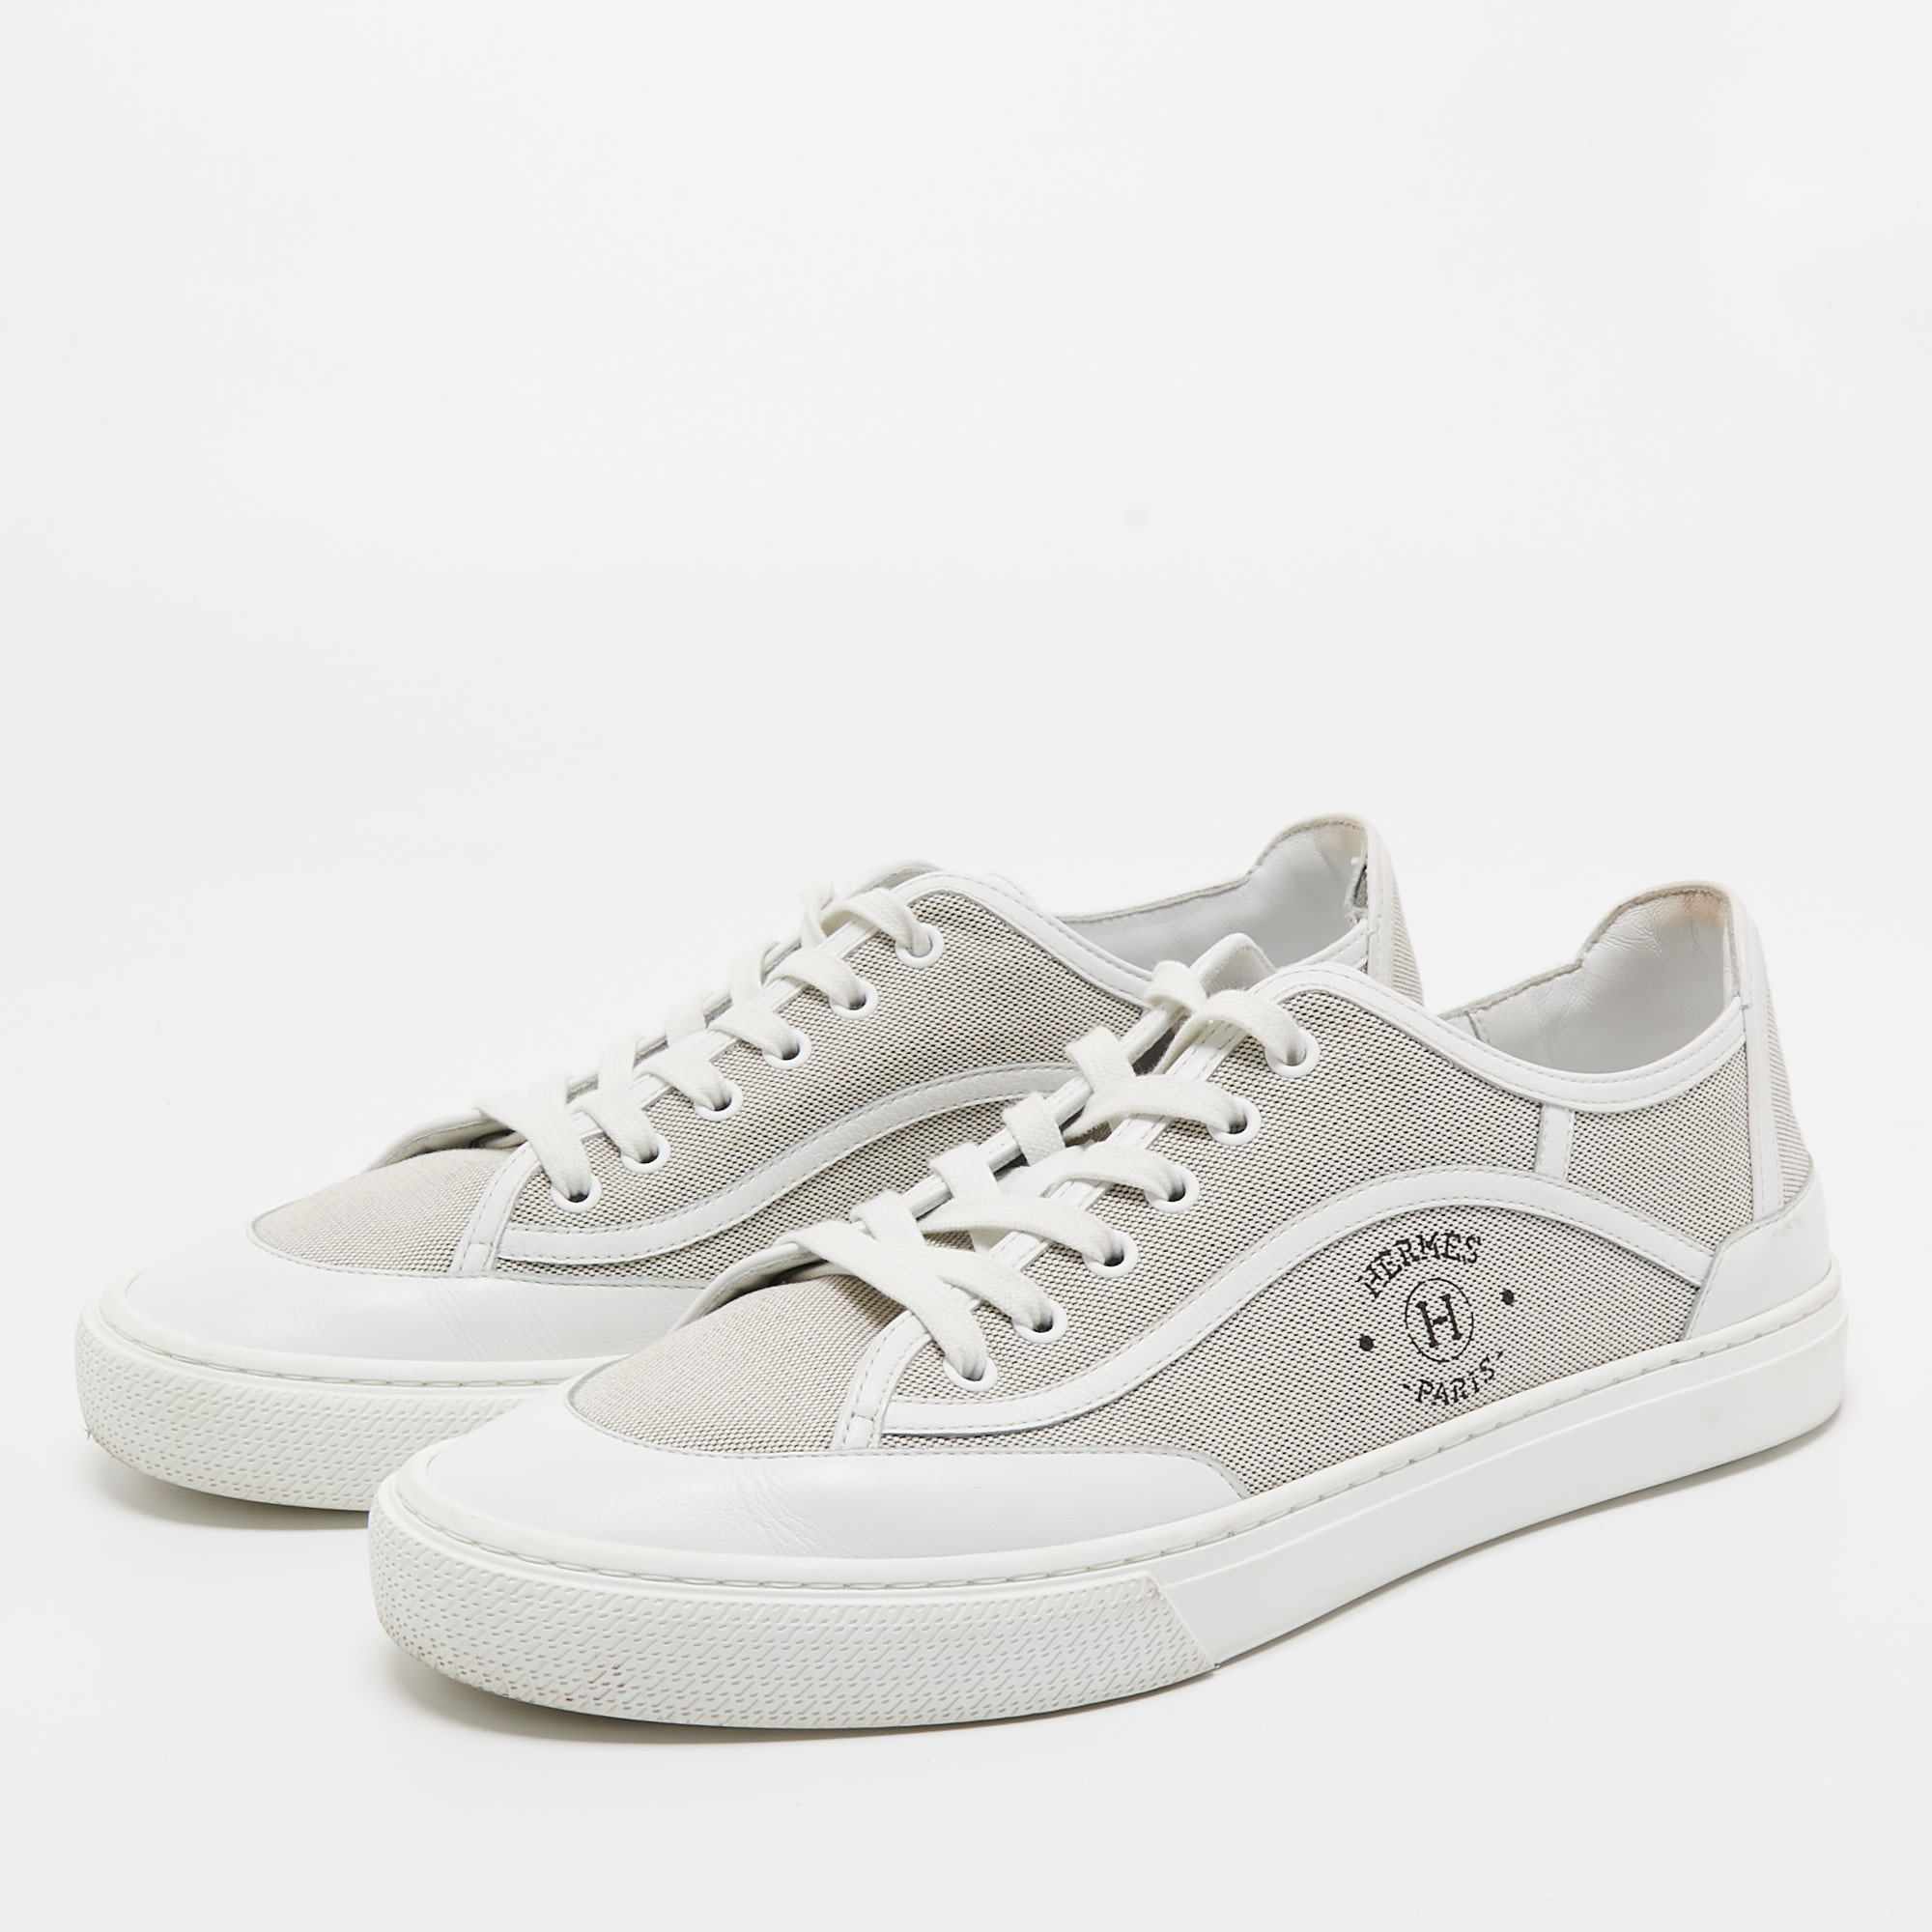 

Hermes Grey/White Leather and Canvas Get Low Top Sneakers Size